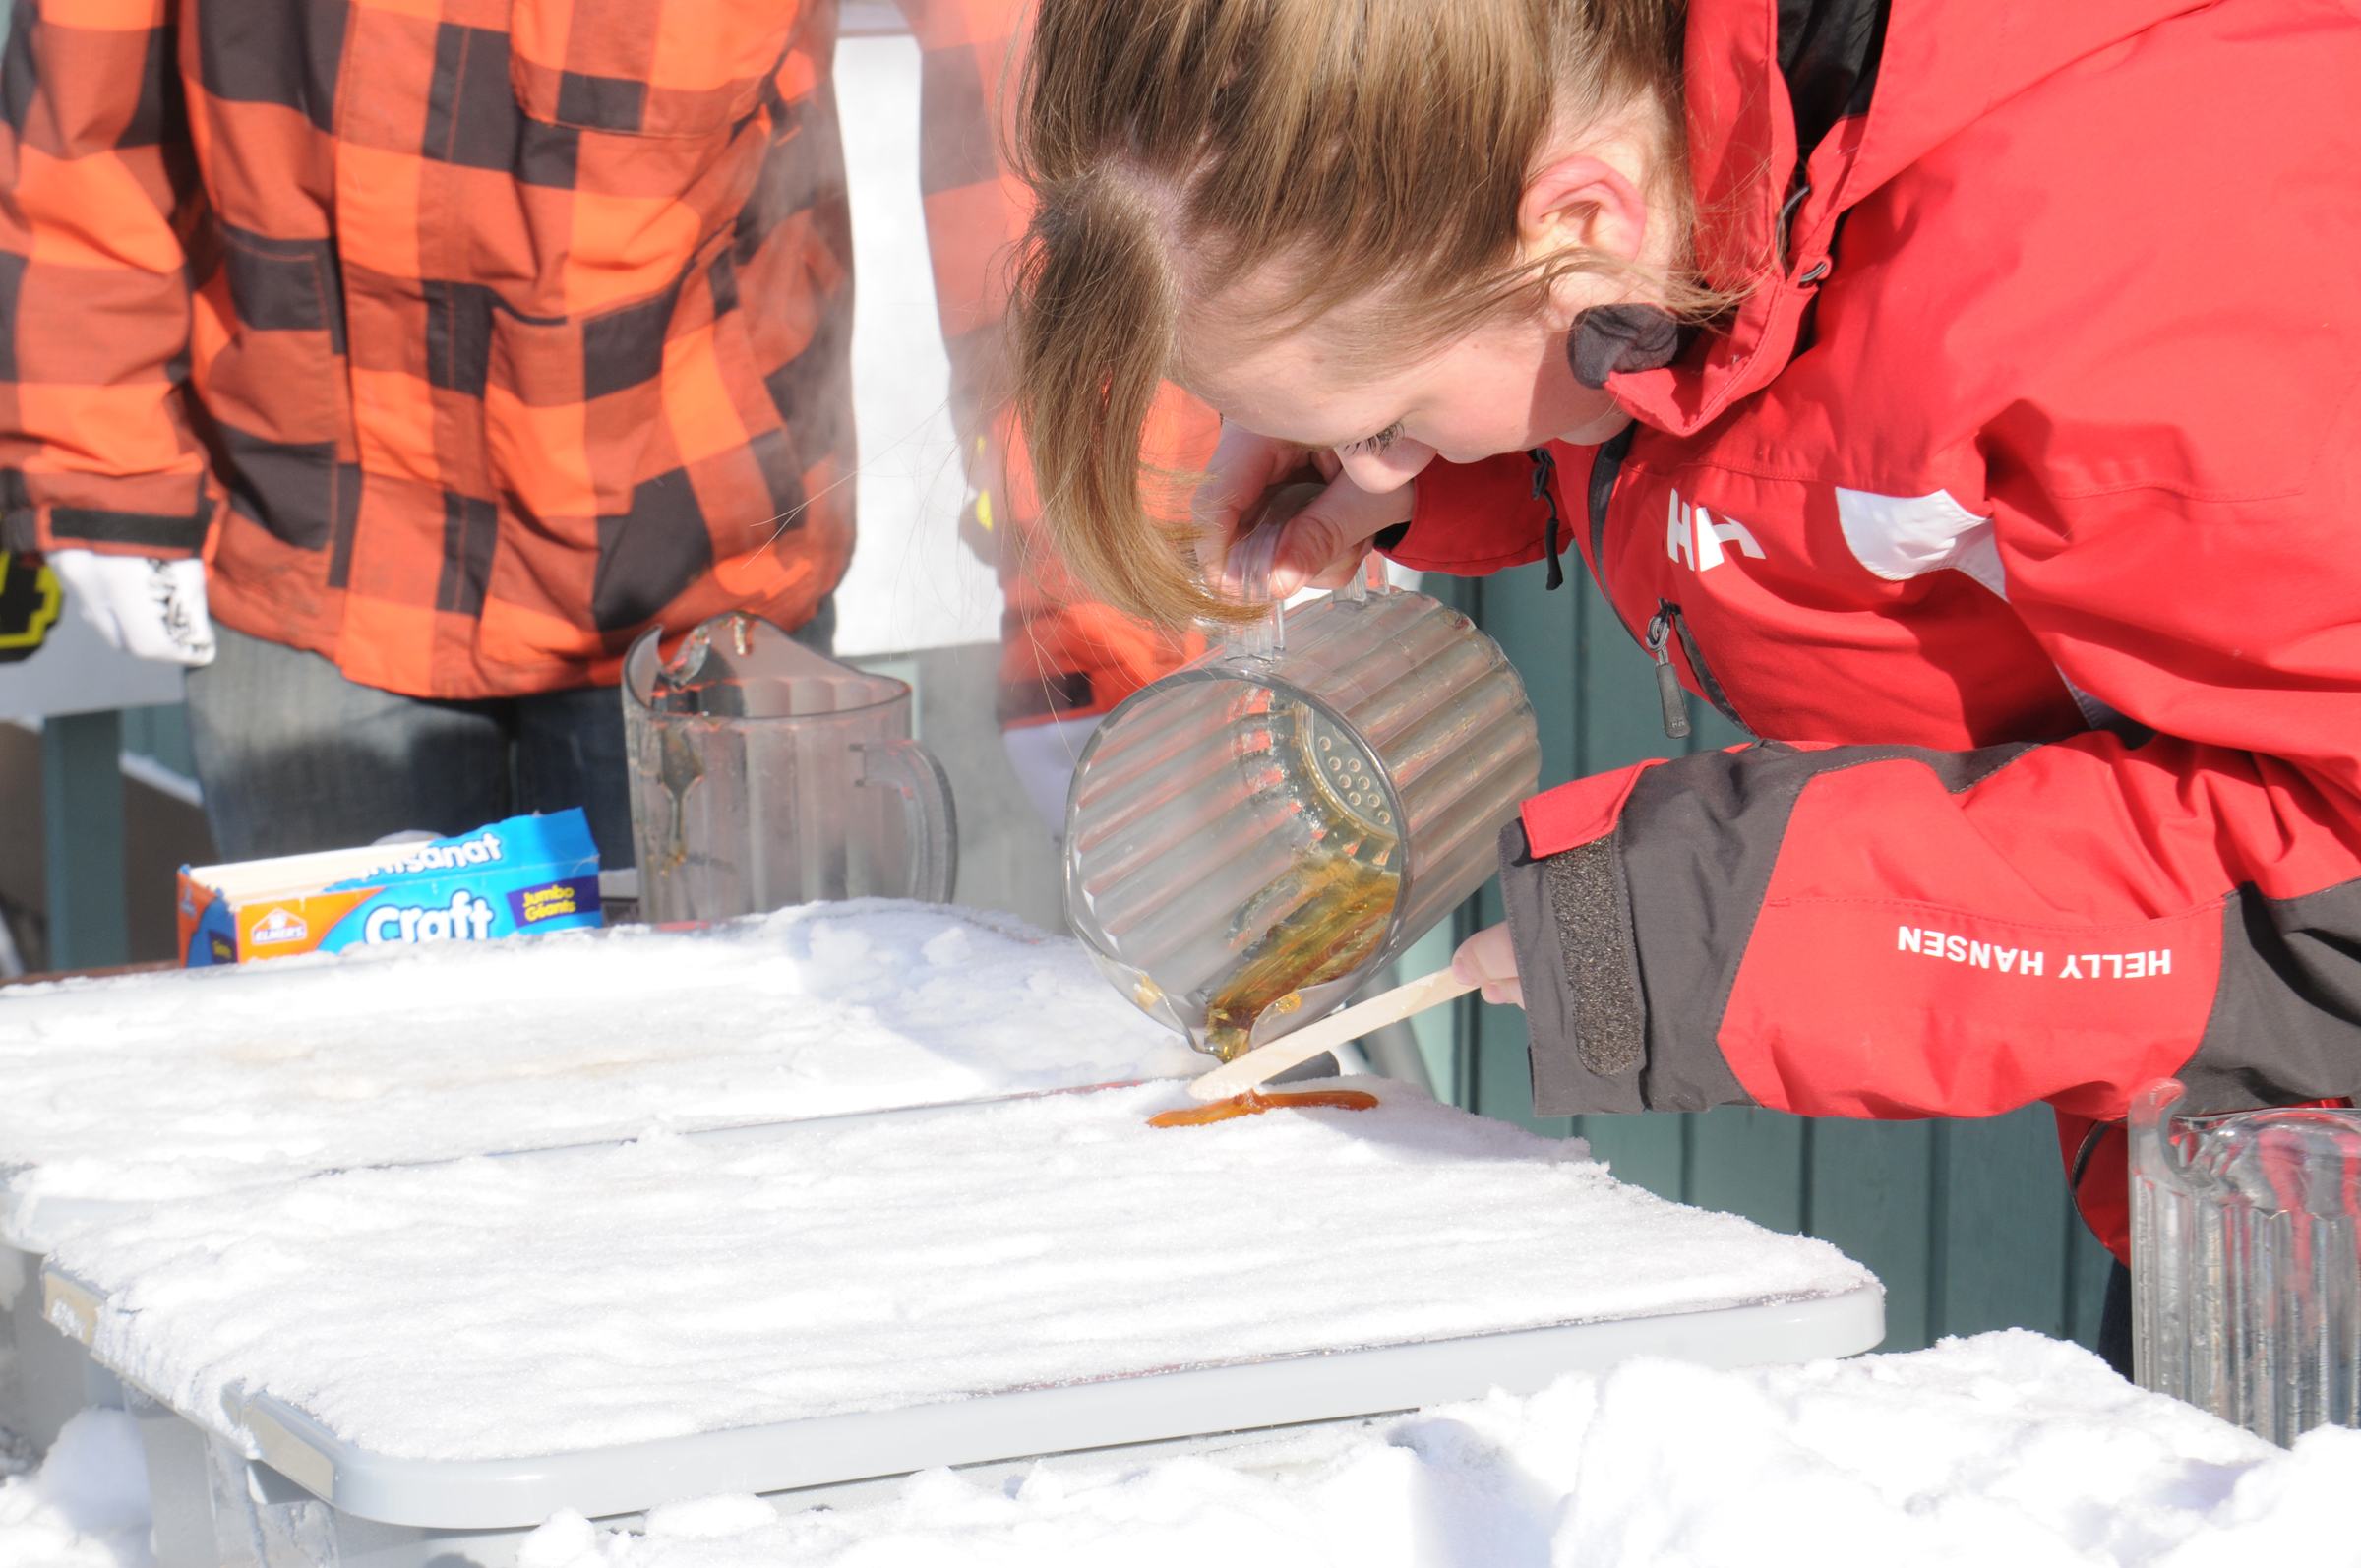 SOMETHING SWEET- Amanda Beggs drizzles some maple syrup over some snow to make maple candy during the Snow Festival at Canyon Ski Resort this past weekend.